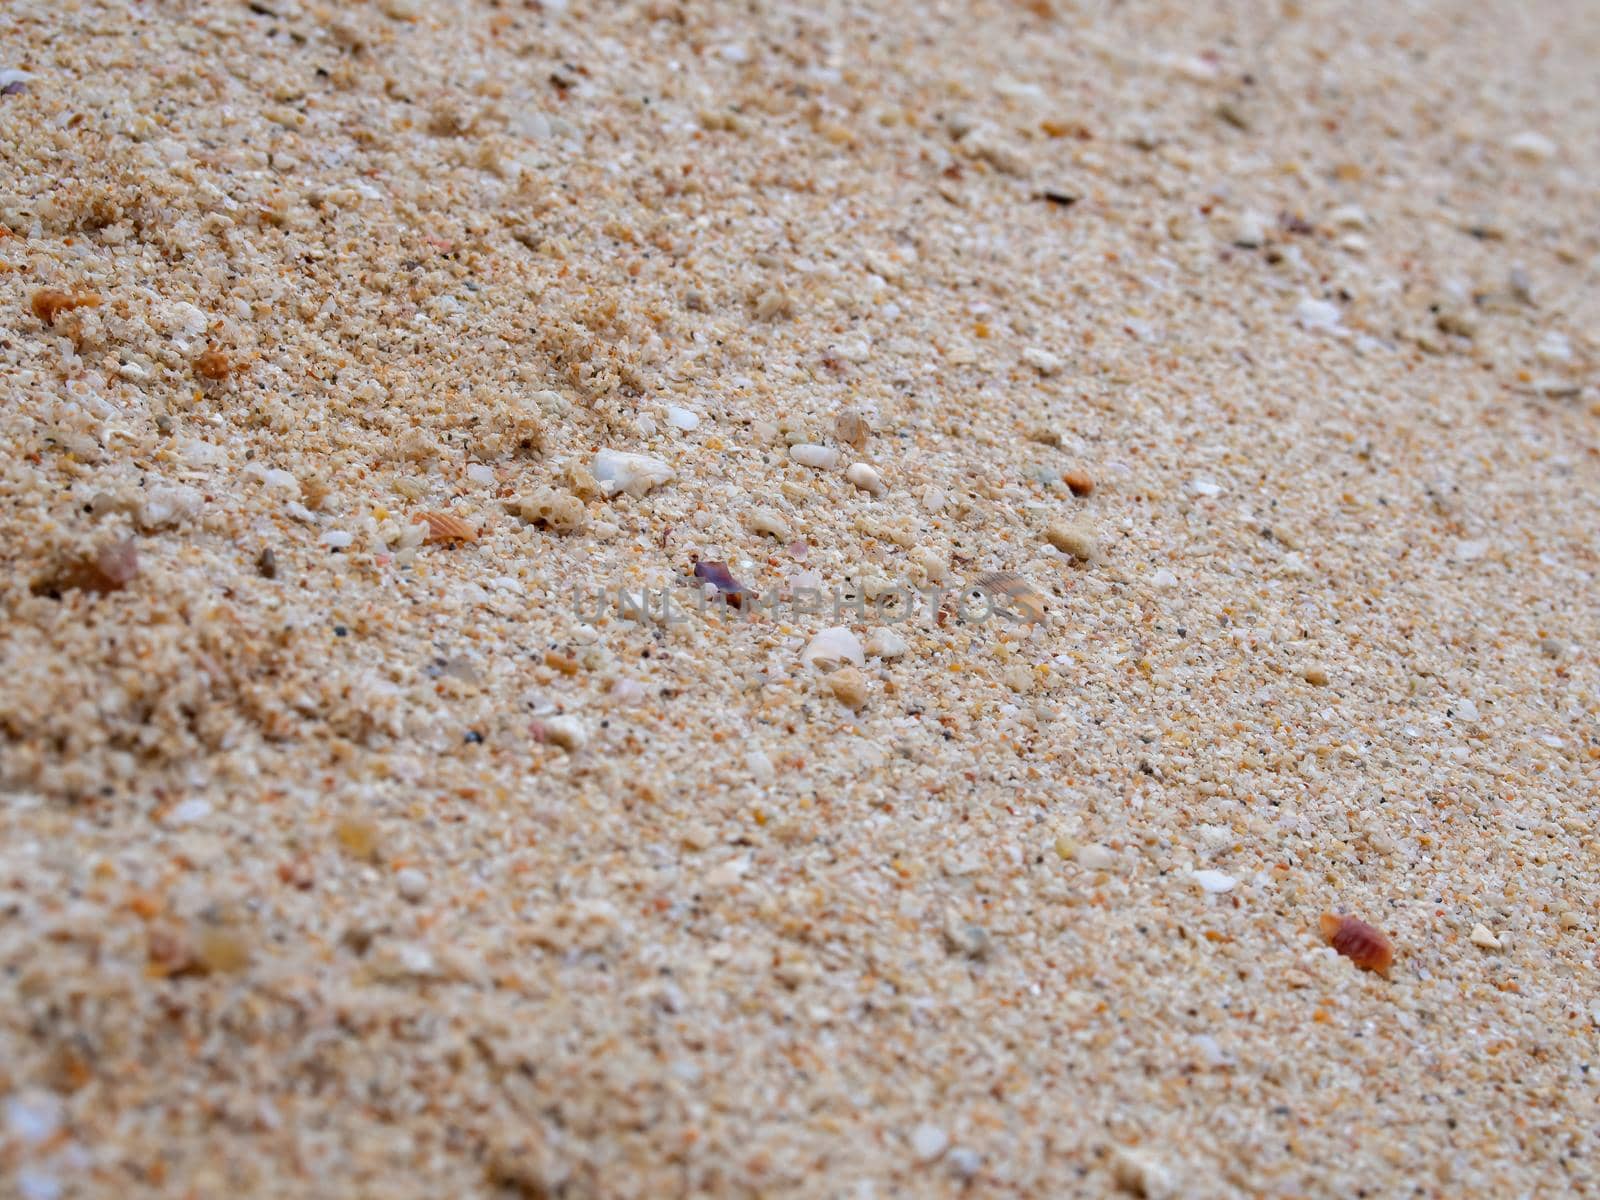 Sand background texture. Close-up of coarse sand grains